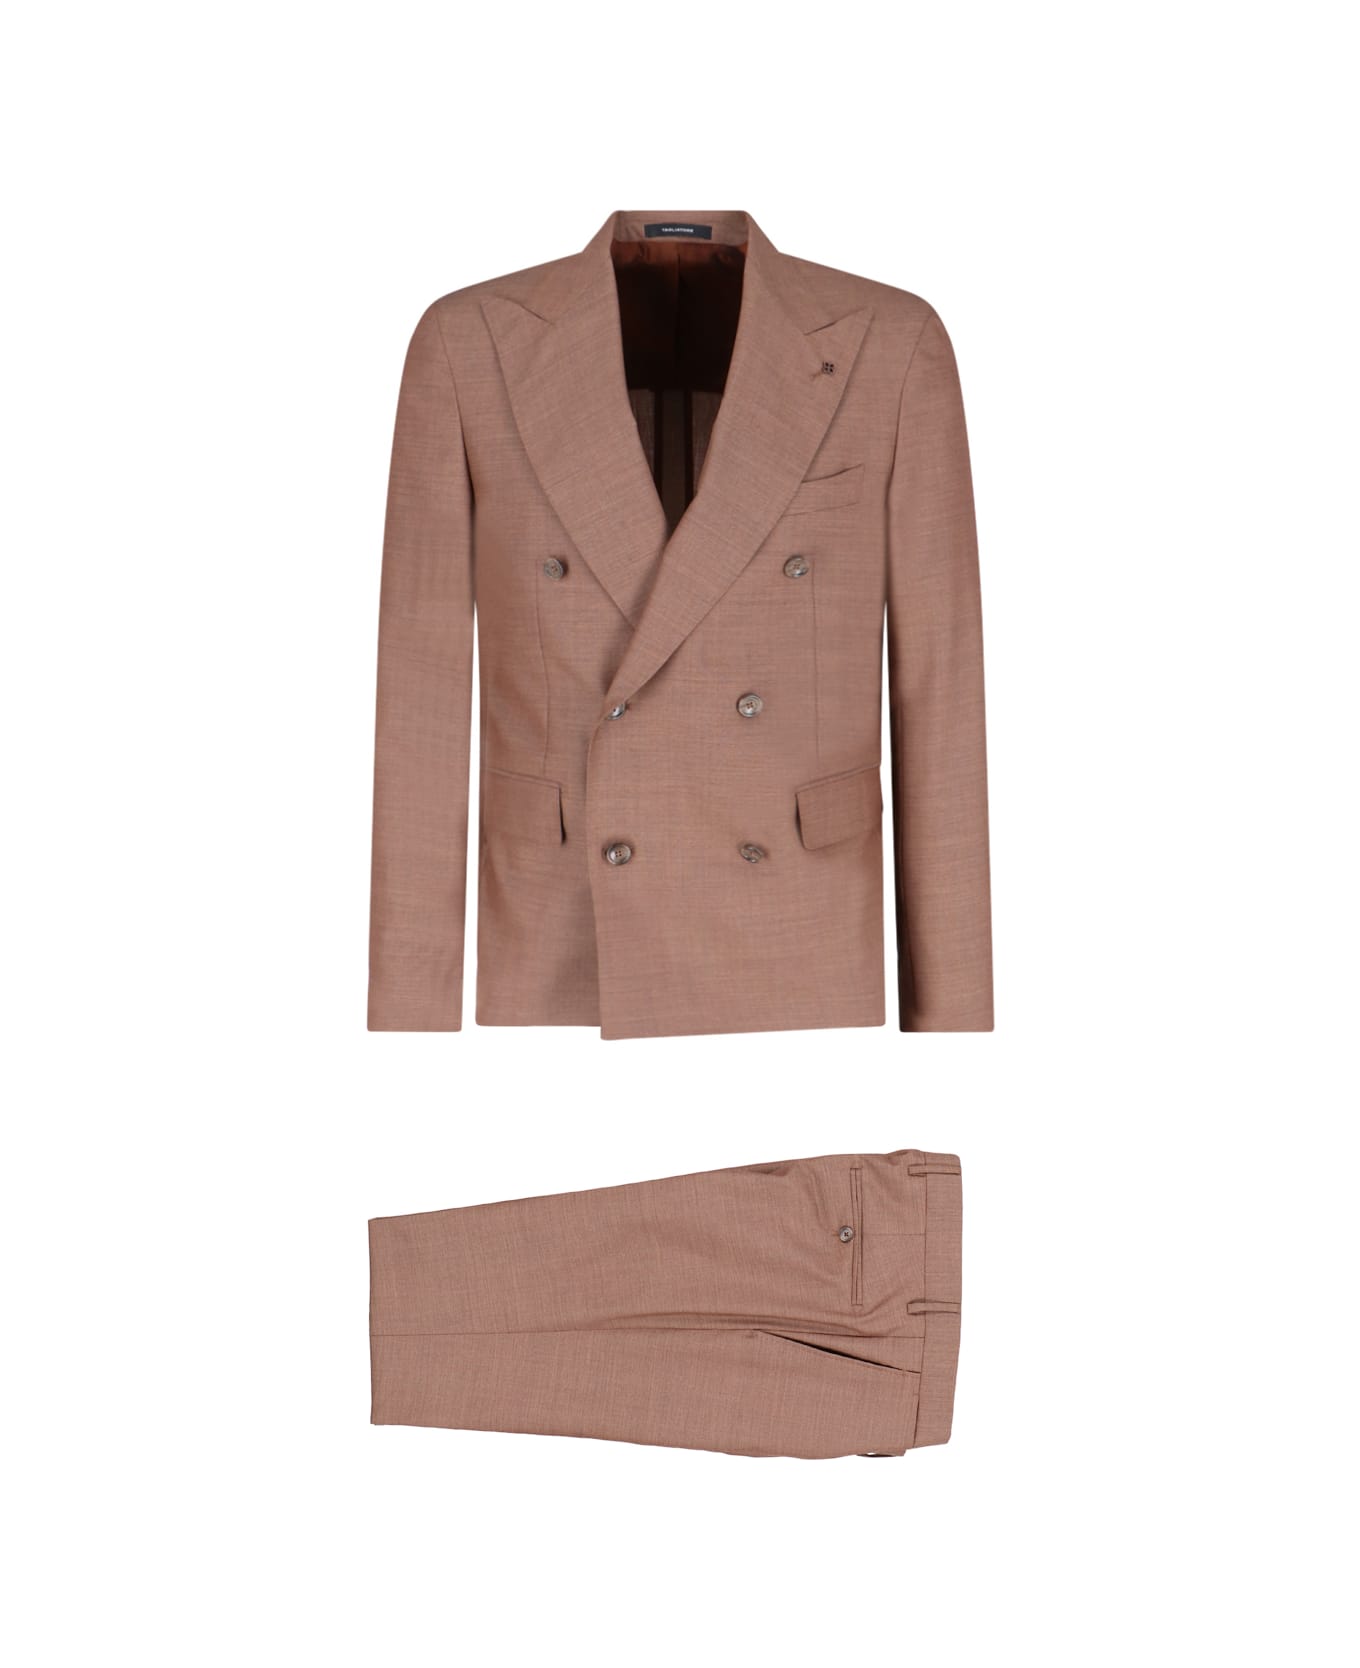 Tagliatore Double-breasted Suit - K1070 スーツ